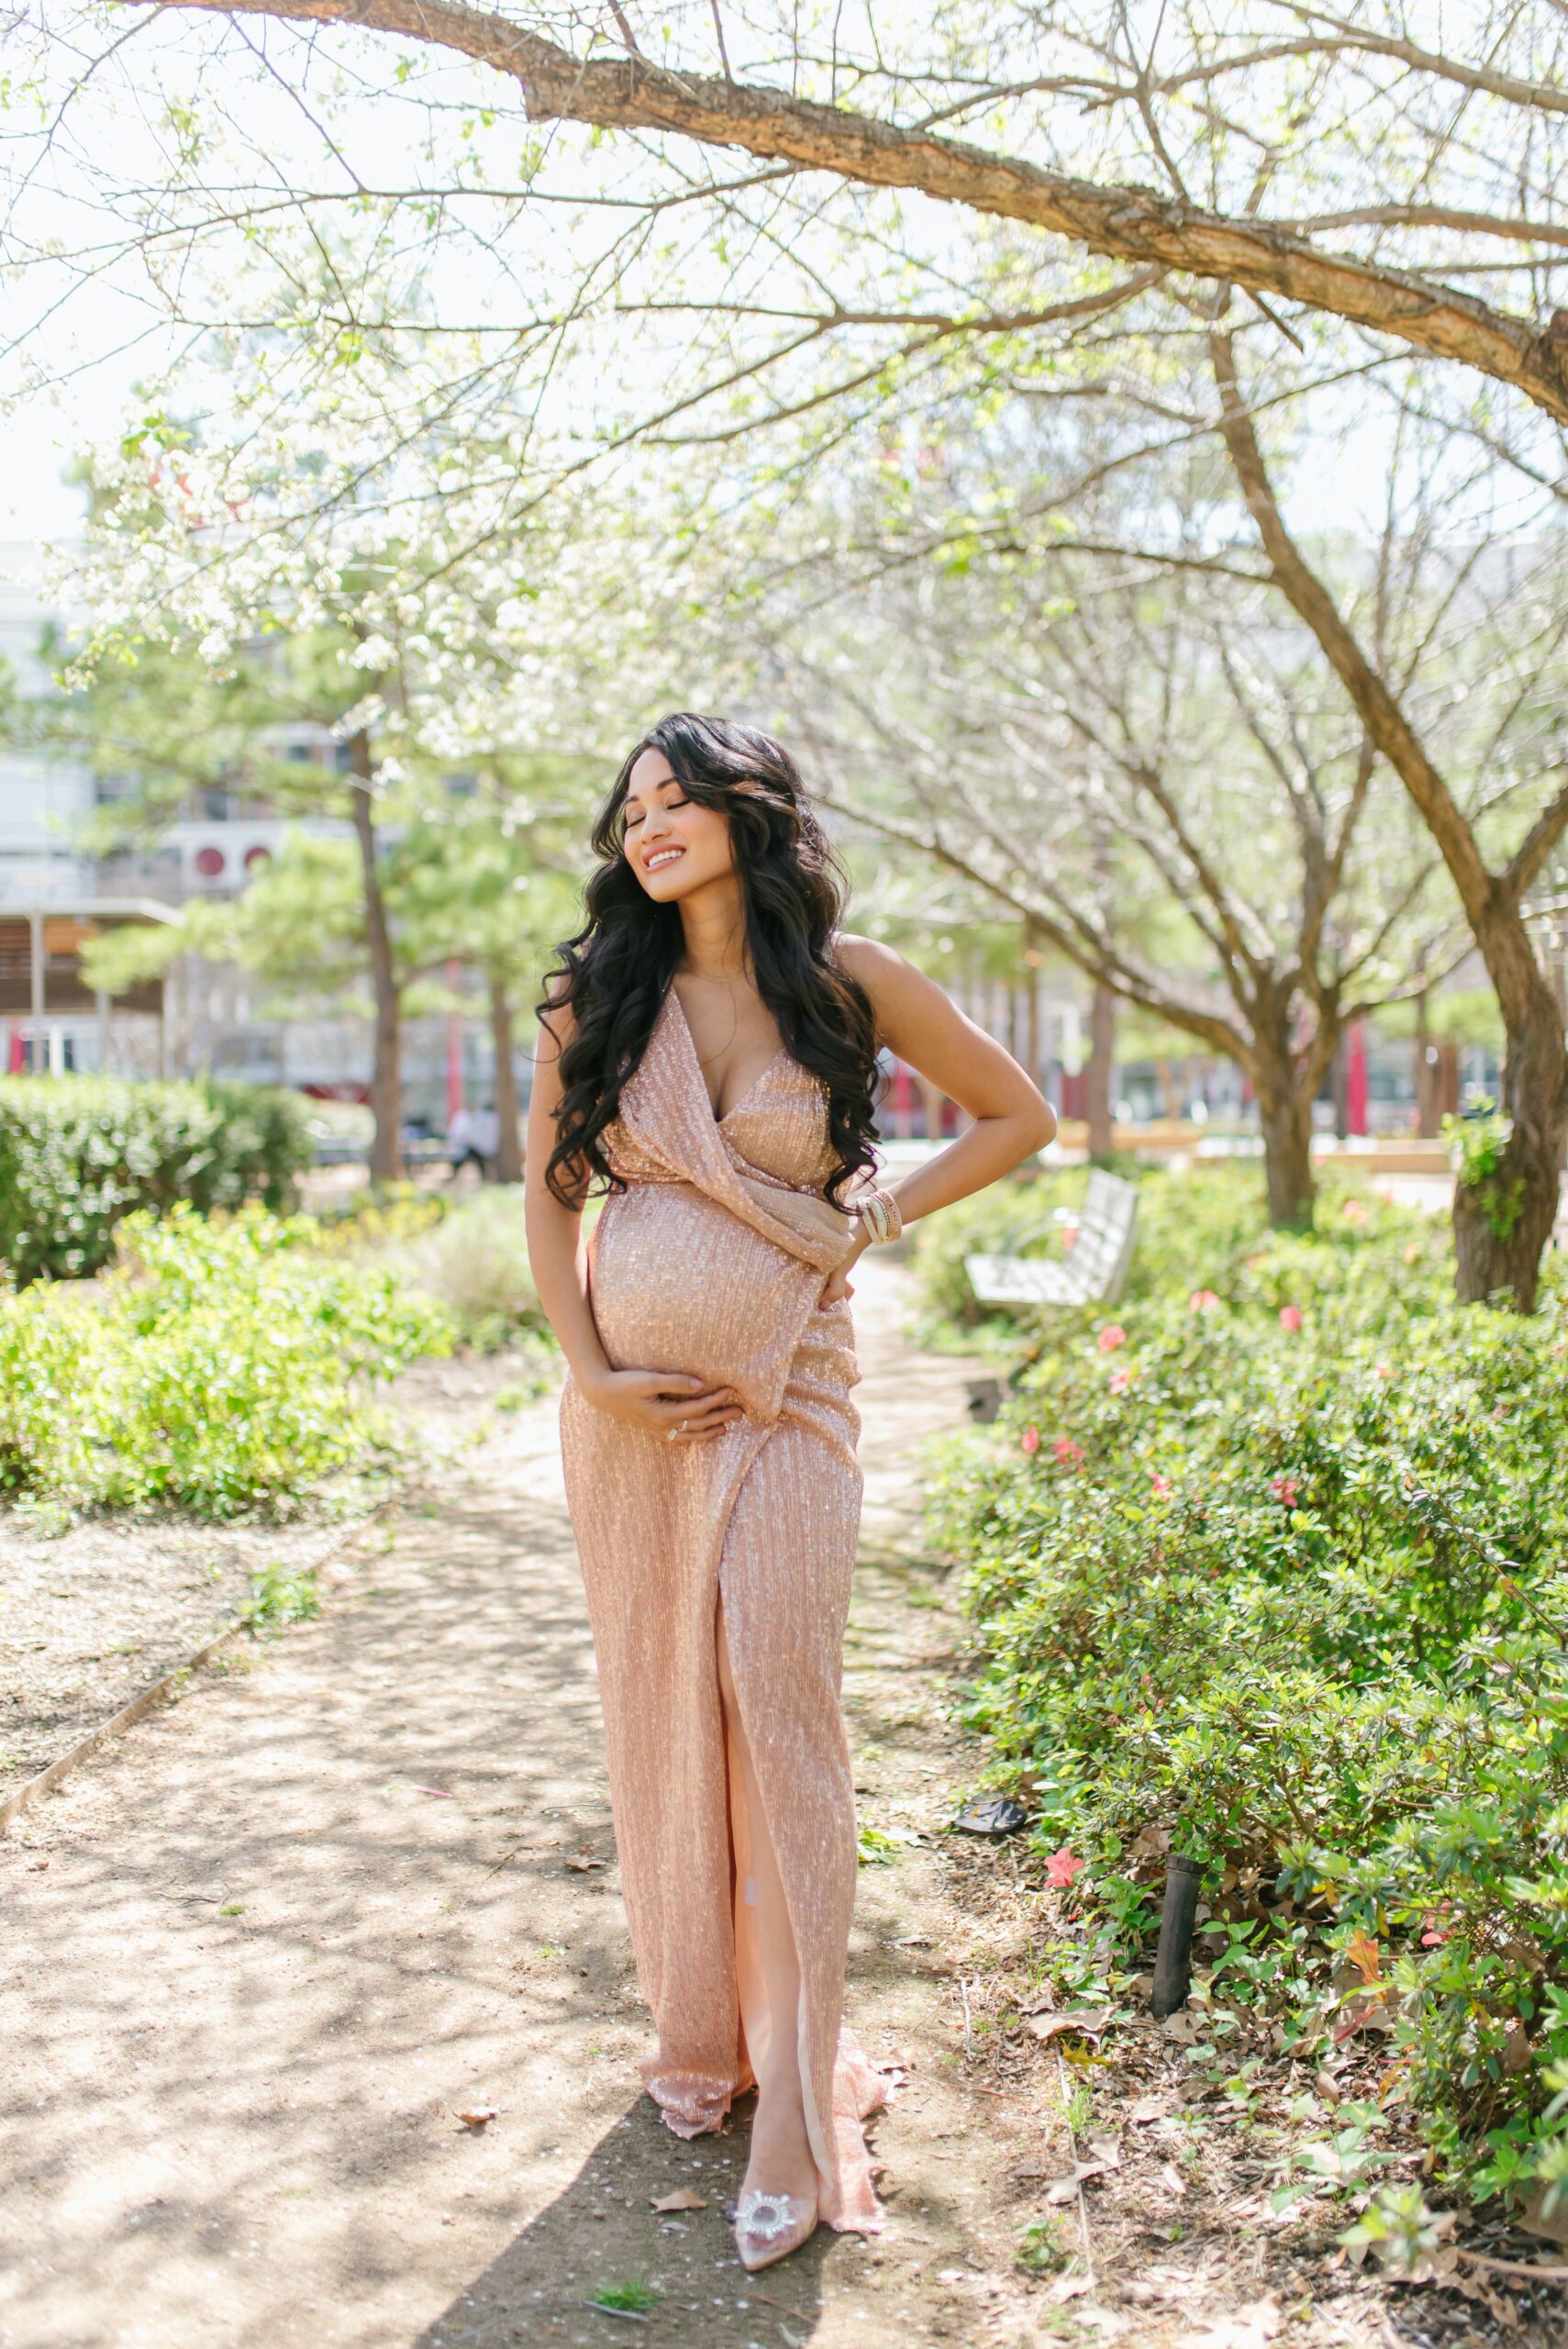 baby shower dress, maternity photos, maternity dress, pink sequin dress, bump style, pregnancy style 